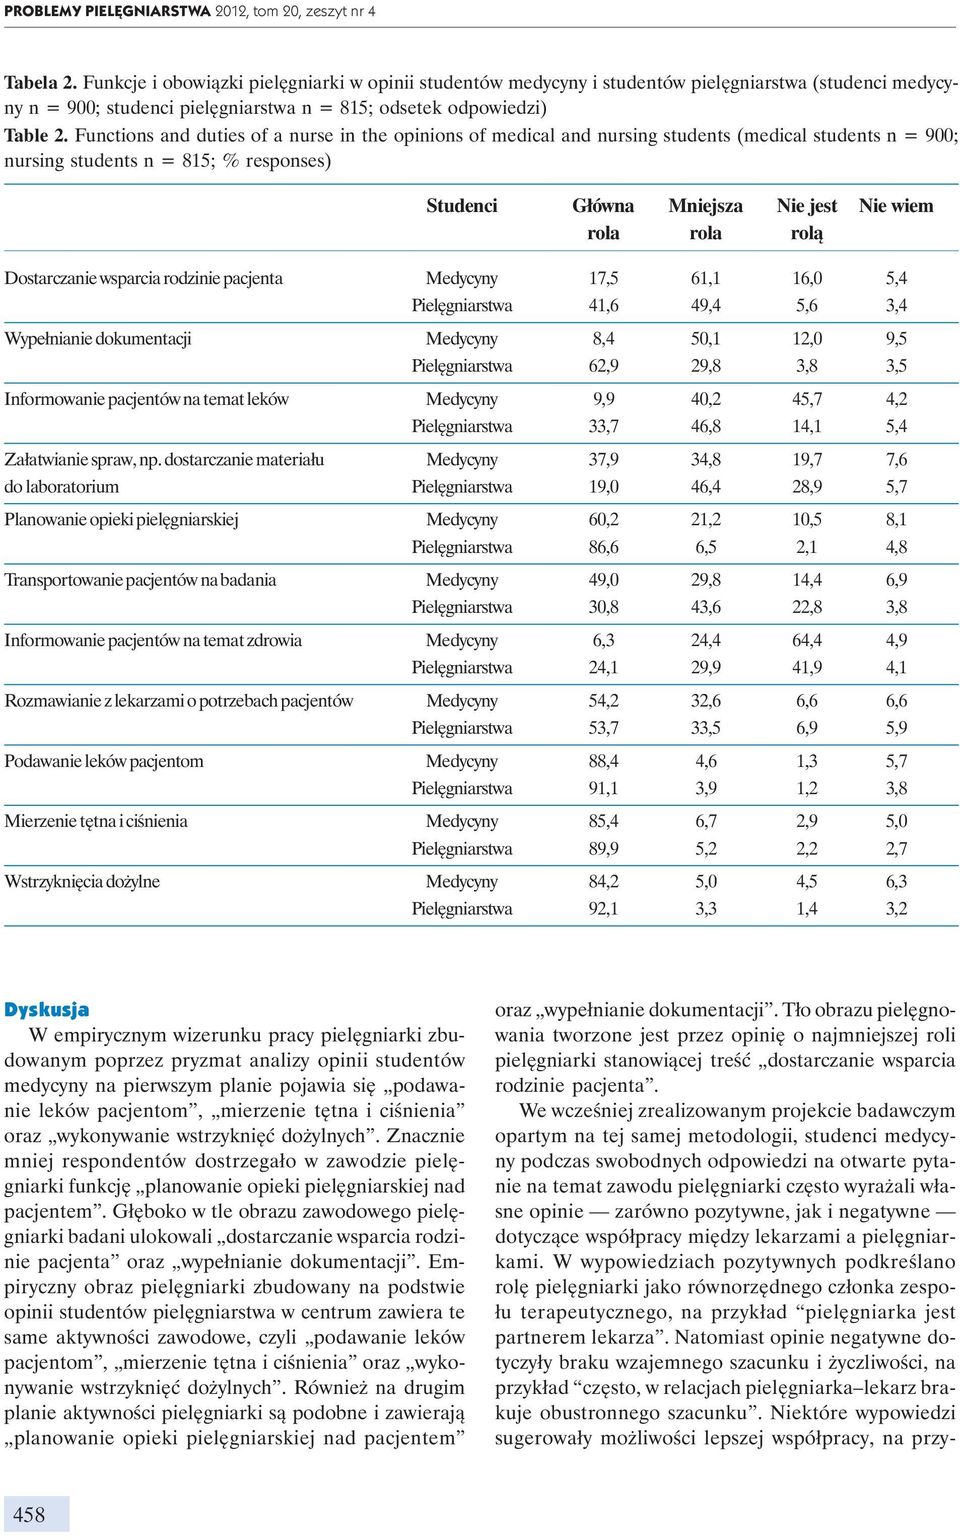 Functions and duties of a nurse in the opinions of medical and nursing students (medical students n = 900; nursing students n = 815; % responses) Studenci Główna Mniejsza Nie jest Nie wiem rola rola